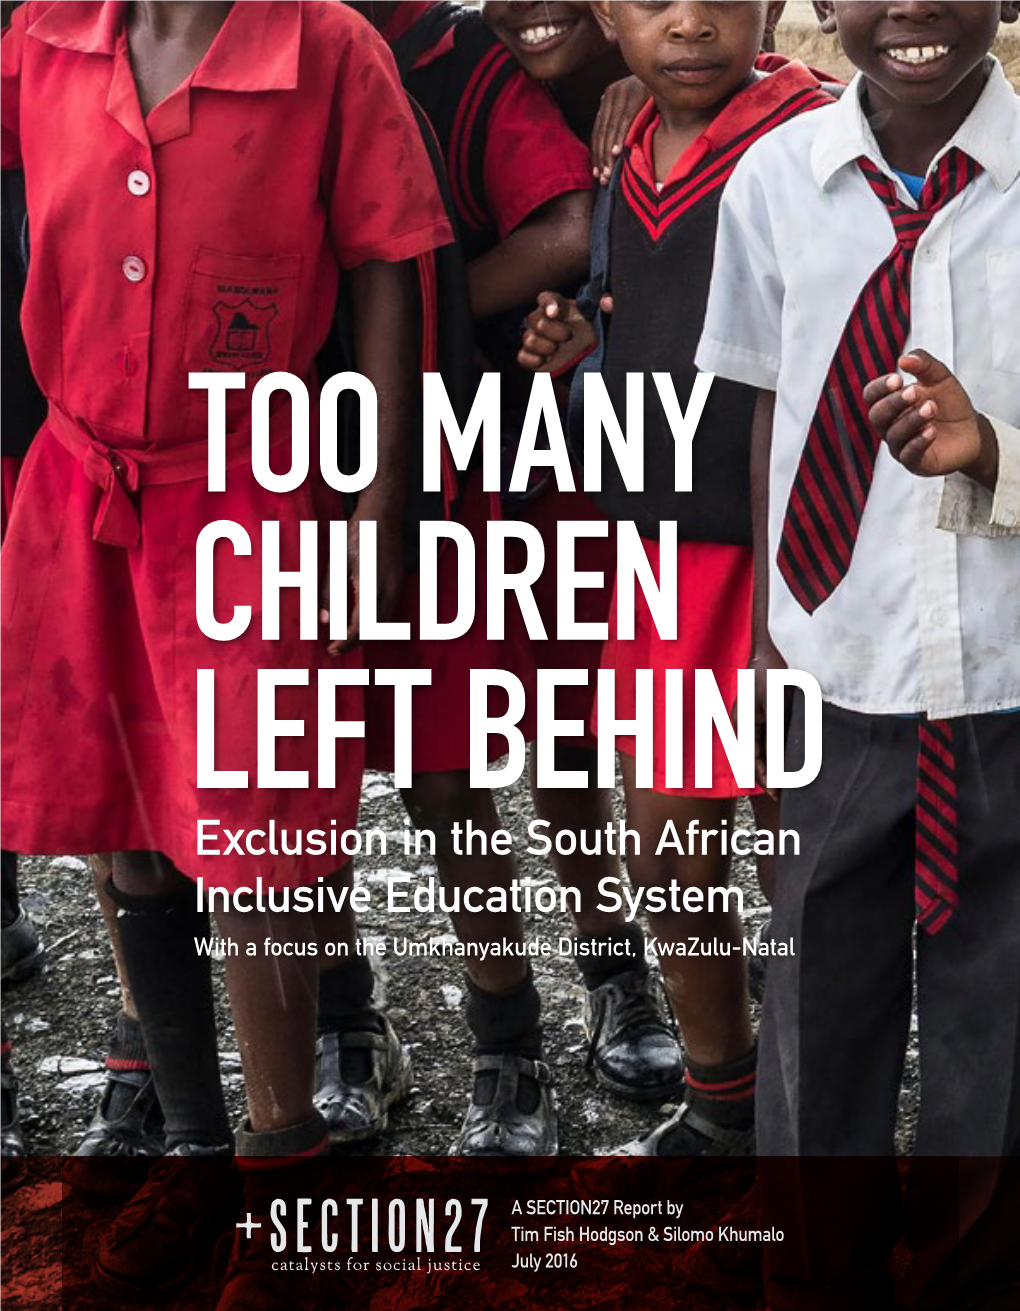 Exclusion in the South African Inclusive Education System with a Focus on the Umkhanyakude District, Kwazulu-Natal